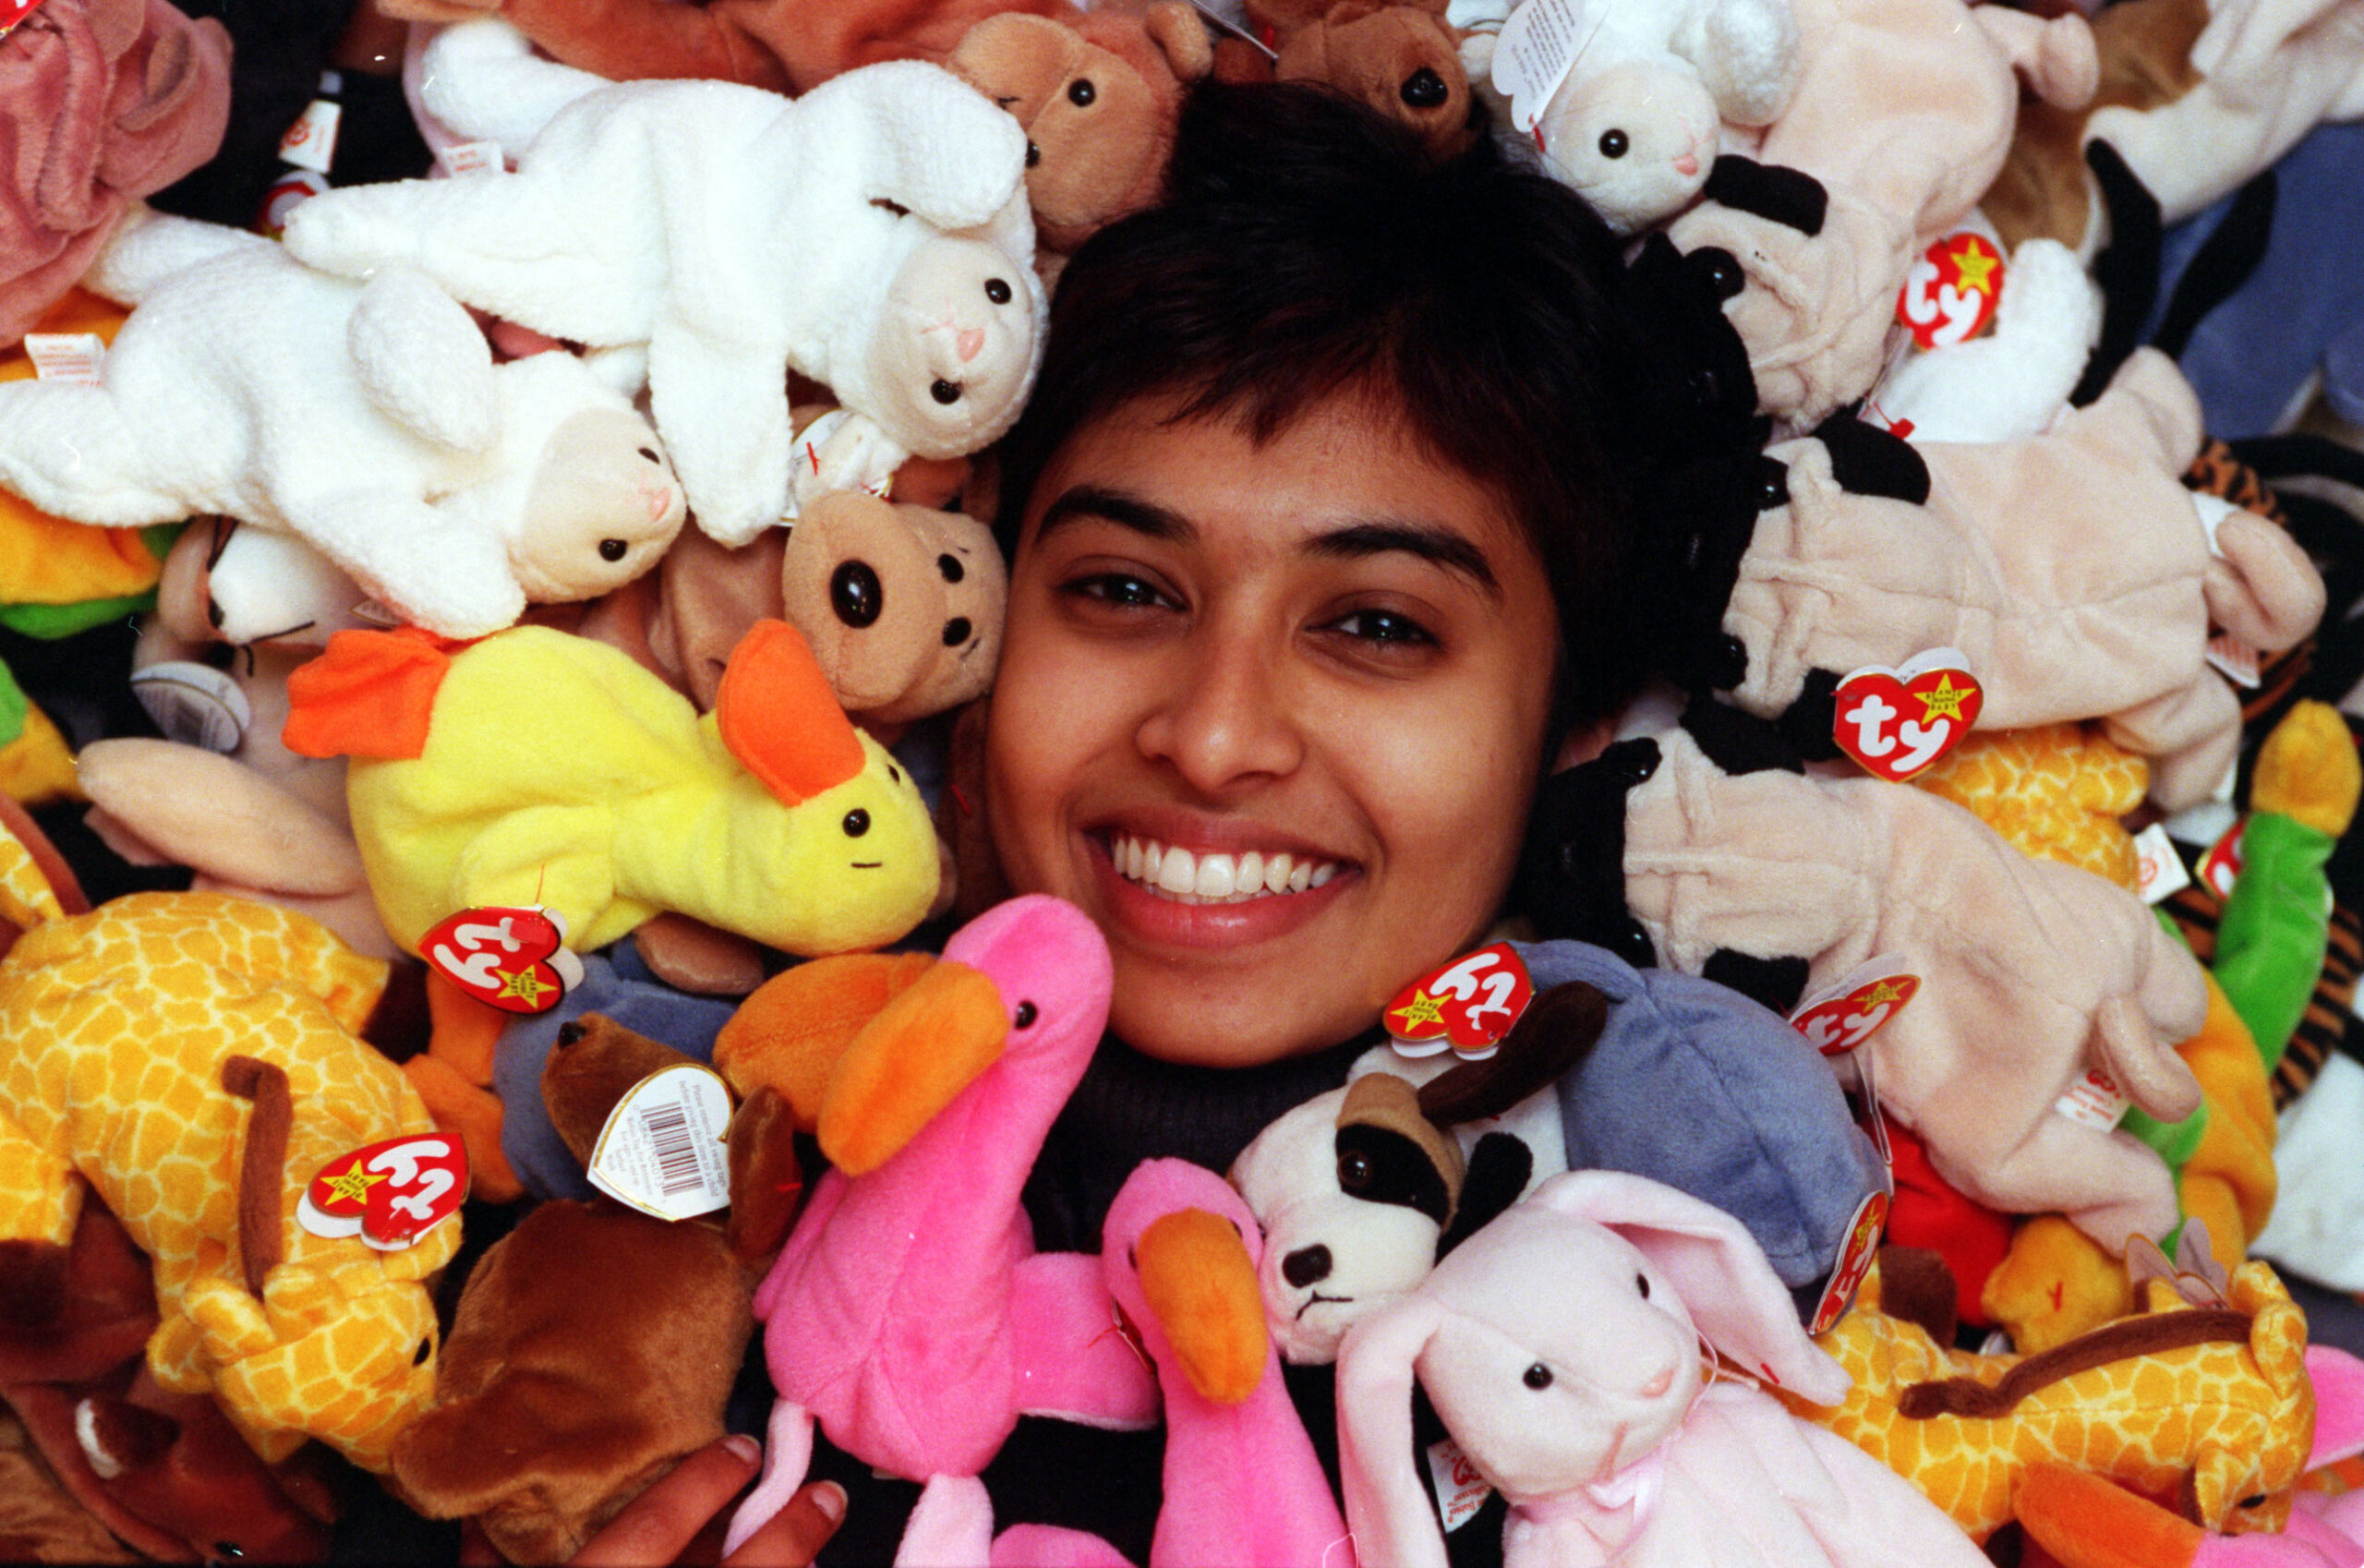 Nawshika Ganegama....pictured With The Next Big Craze In Children's Toys...'beanie Babies'. Americans Are Flying In From The States To Place Orders For The Limited Edition Toys At A5.99.